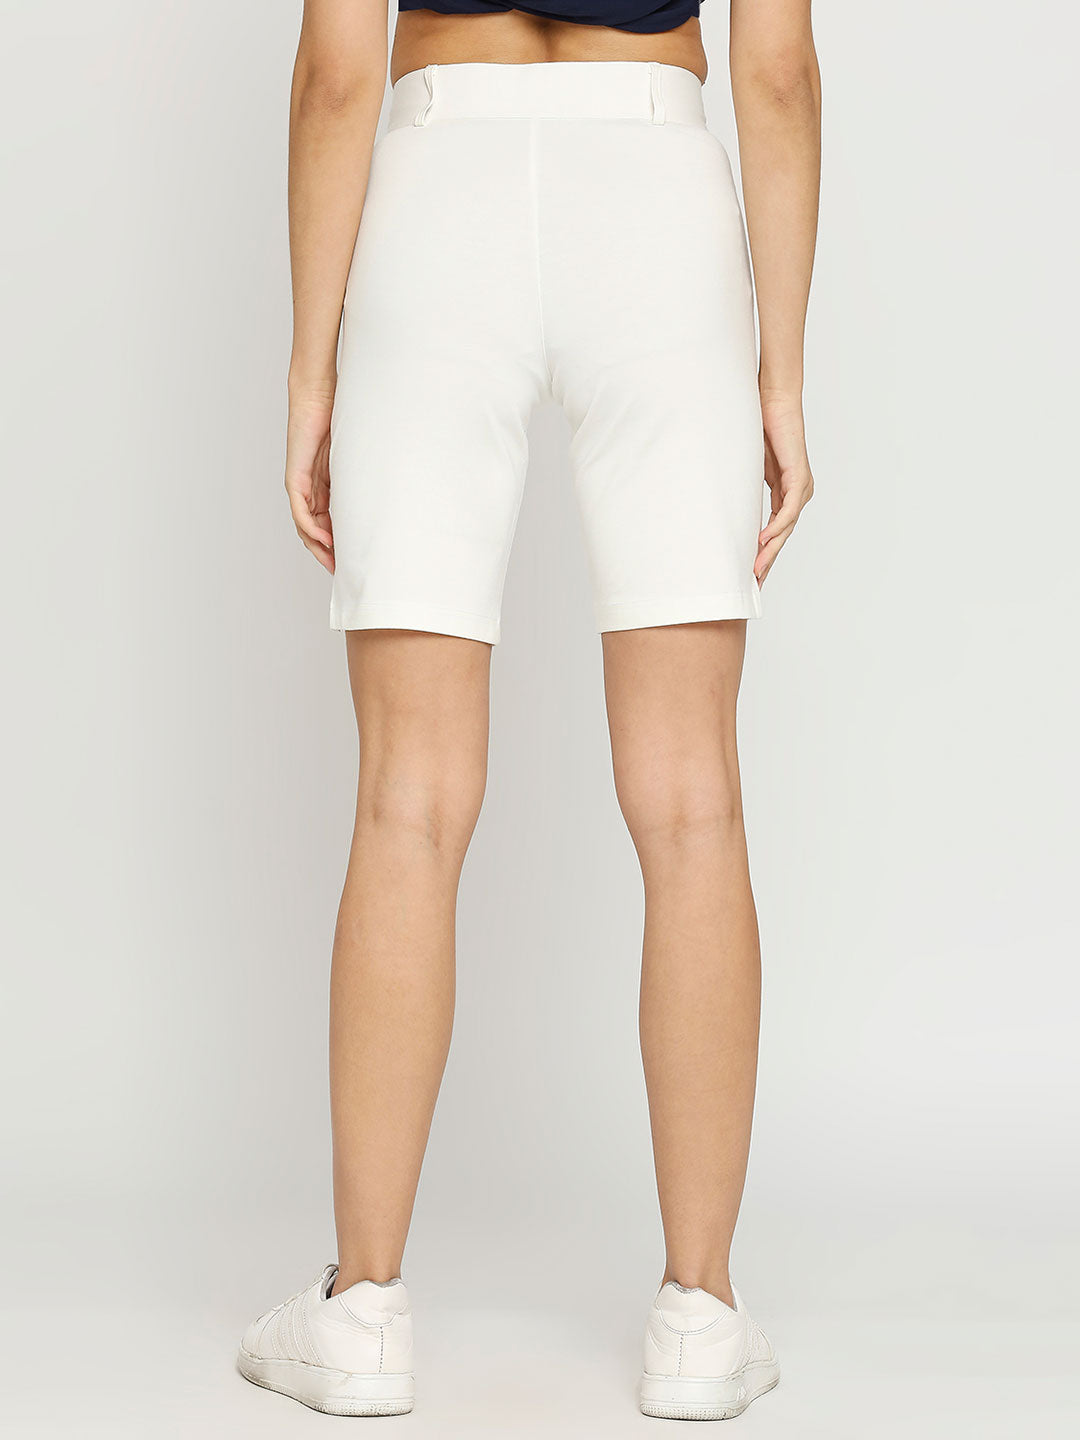 Women's Golf Shorts with Welt Pockets - White